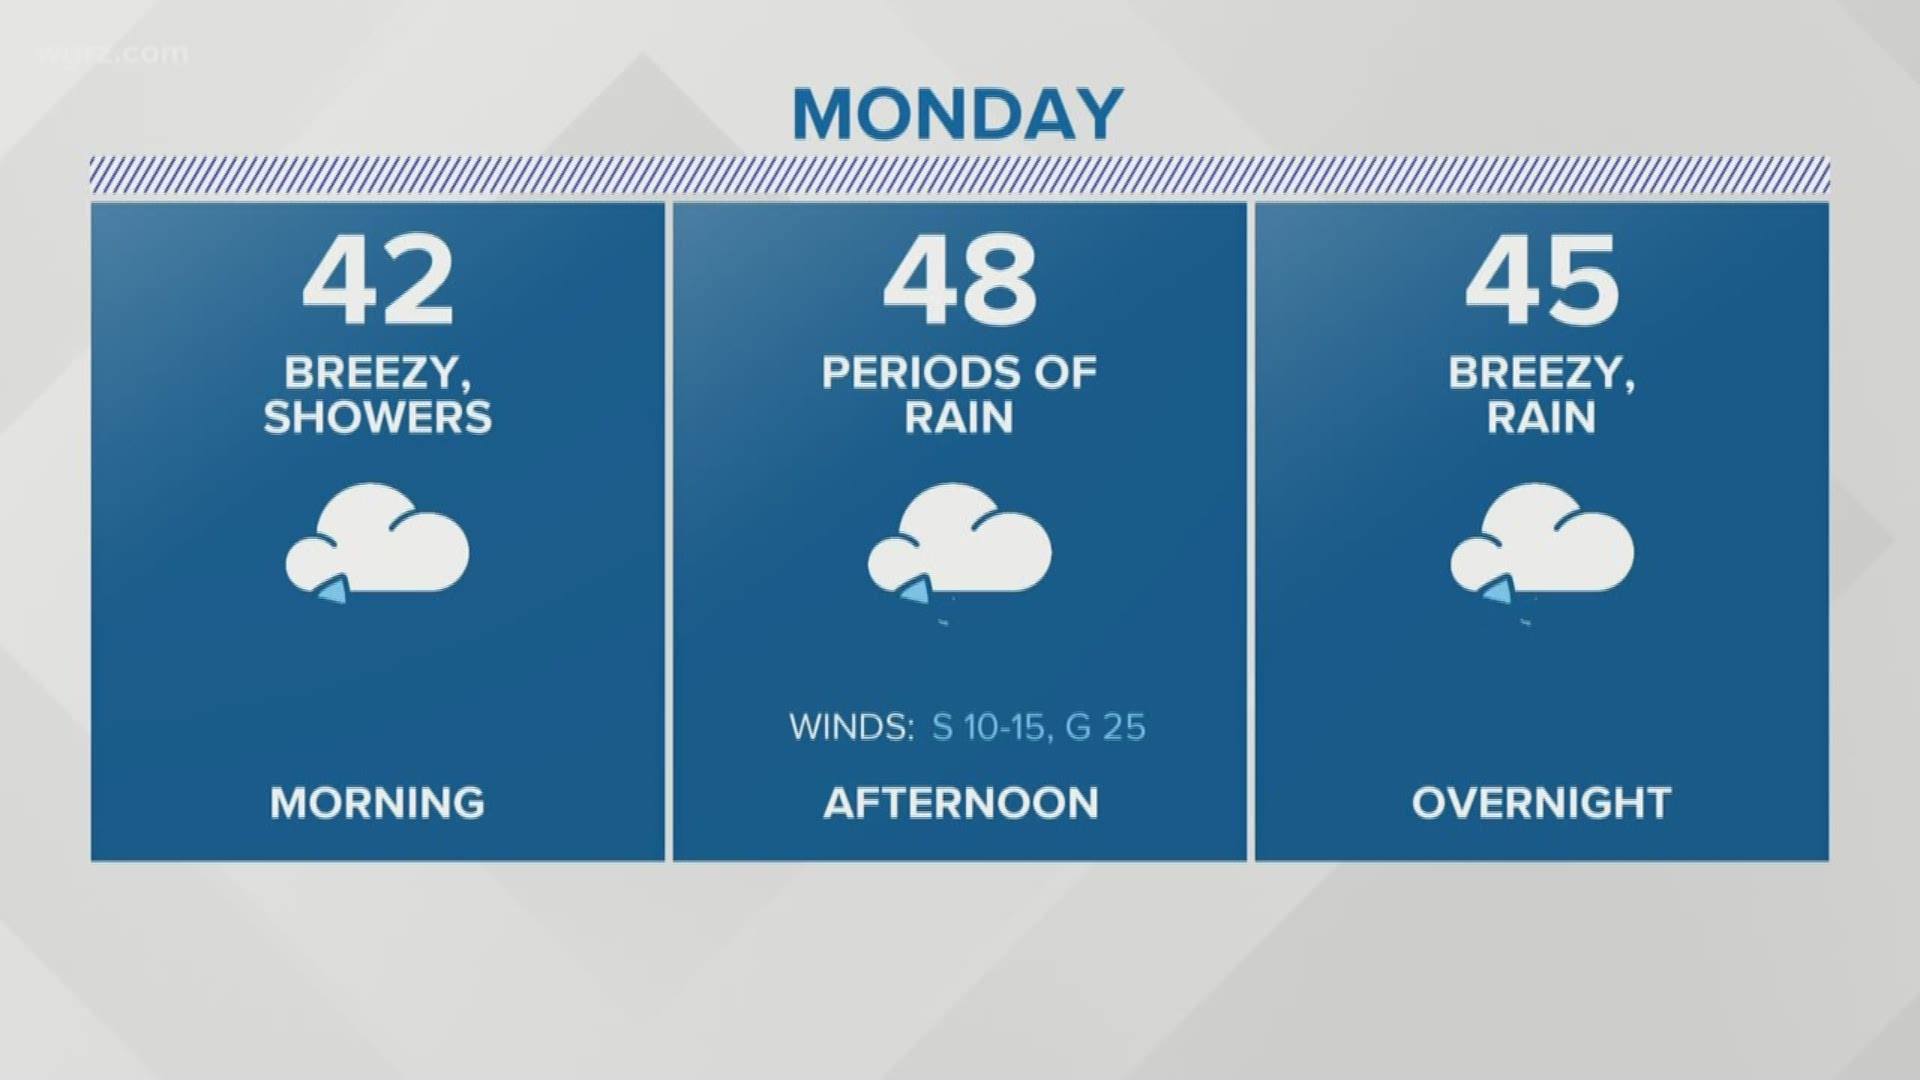 Low 40's tomorrow.  Monday morning is when the shower chances start going up. The better chance for rain is going to wait until Monday afternoon with a breeze.